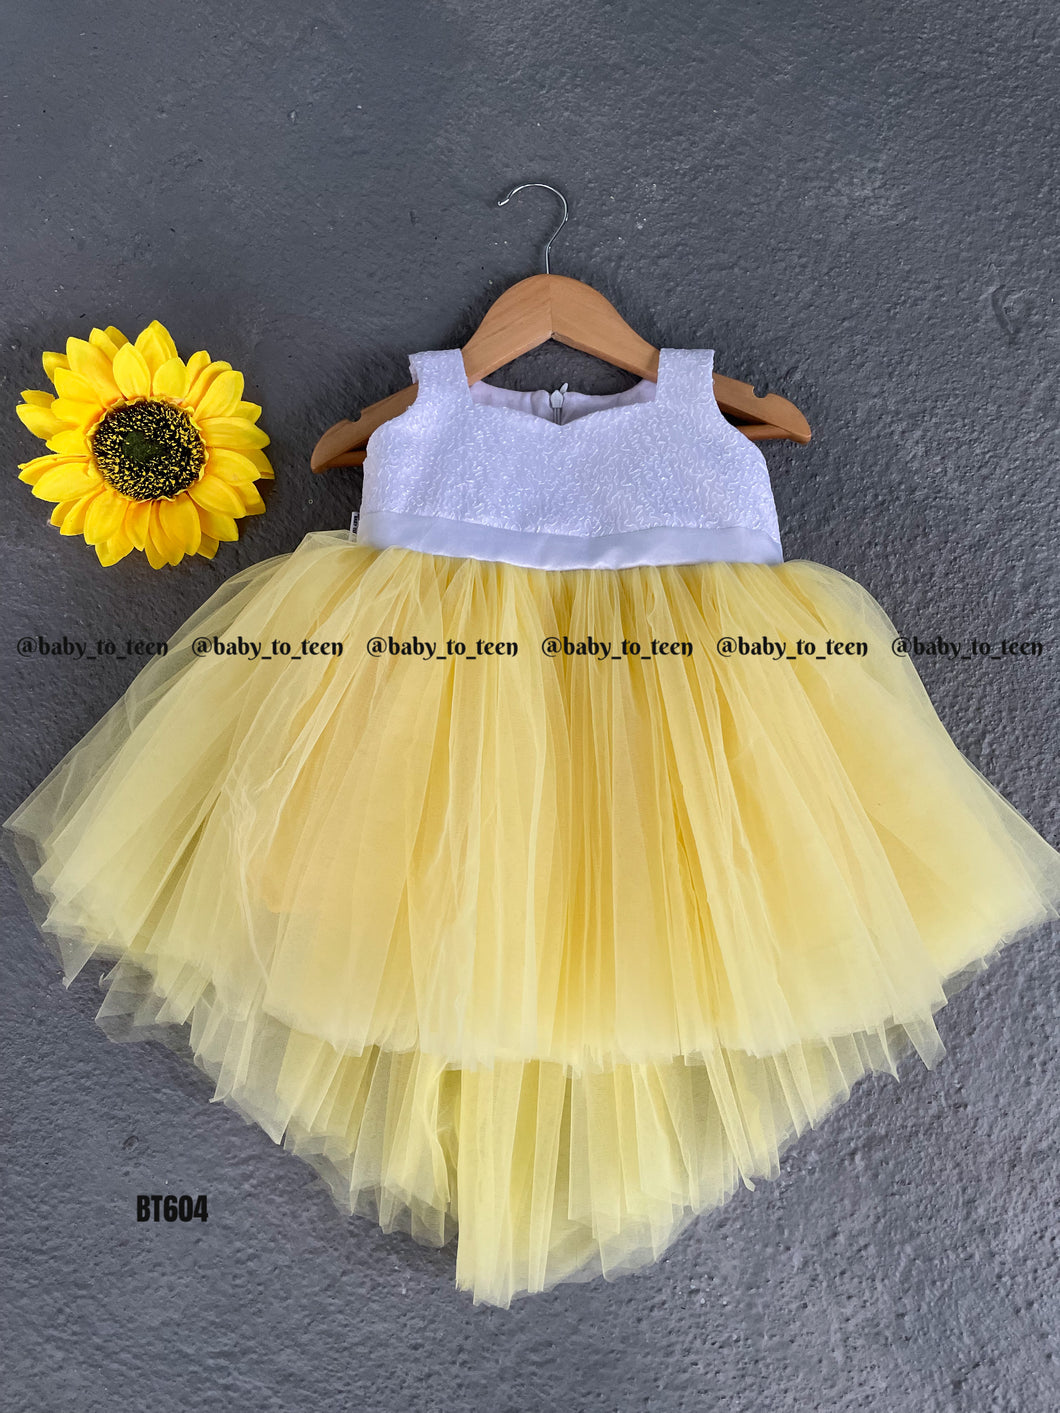 BT604 Elegant High Low Party Wear Frock in White and Yellow Combination